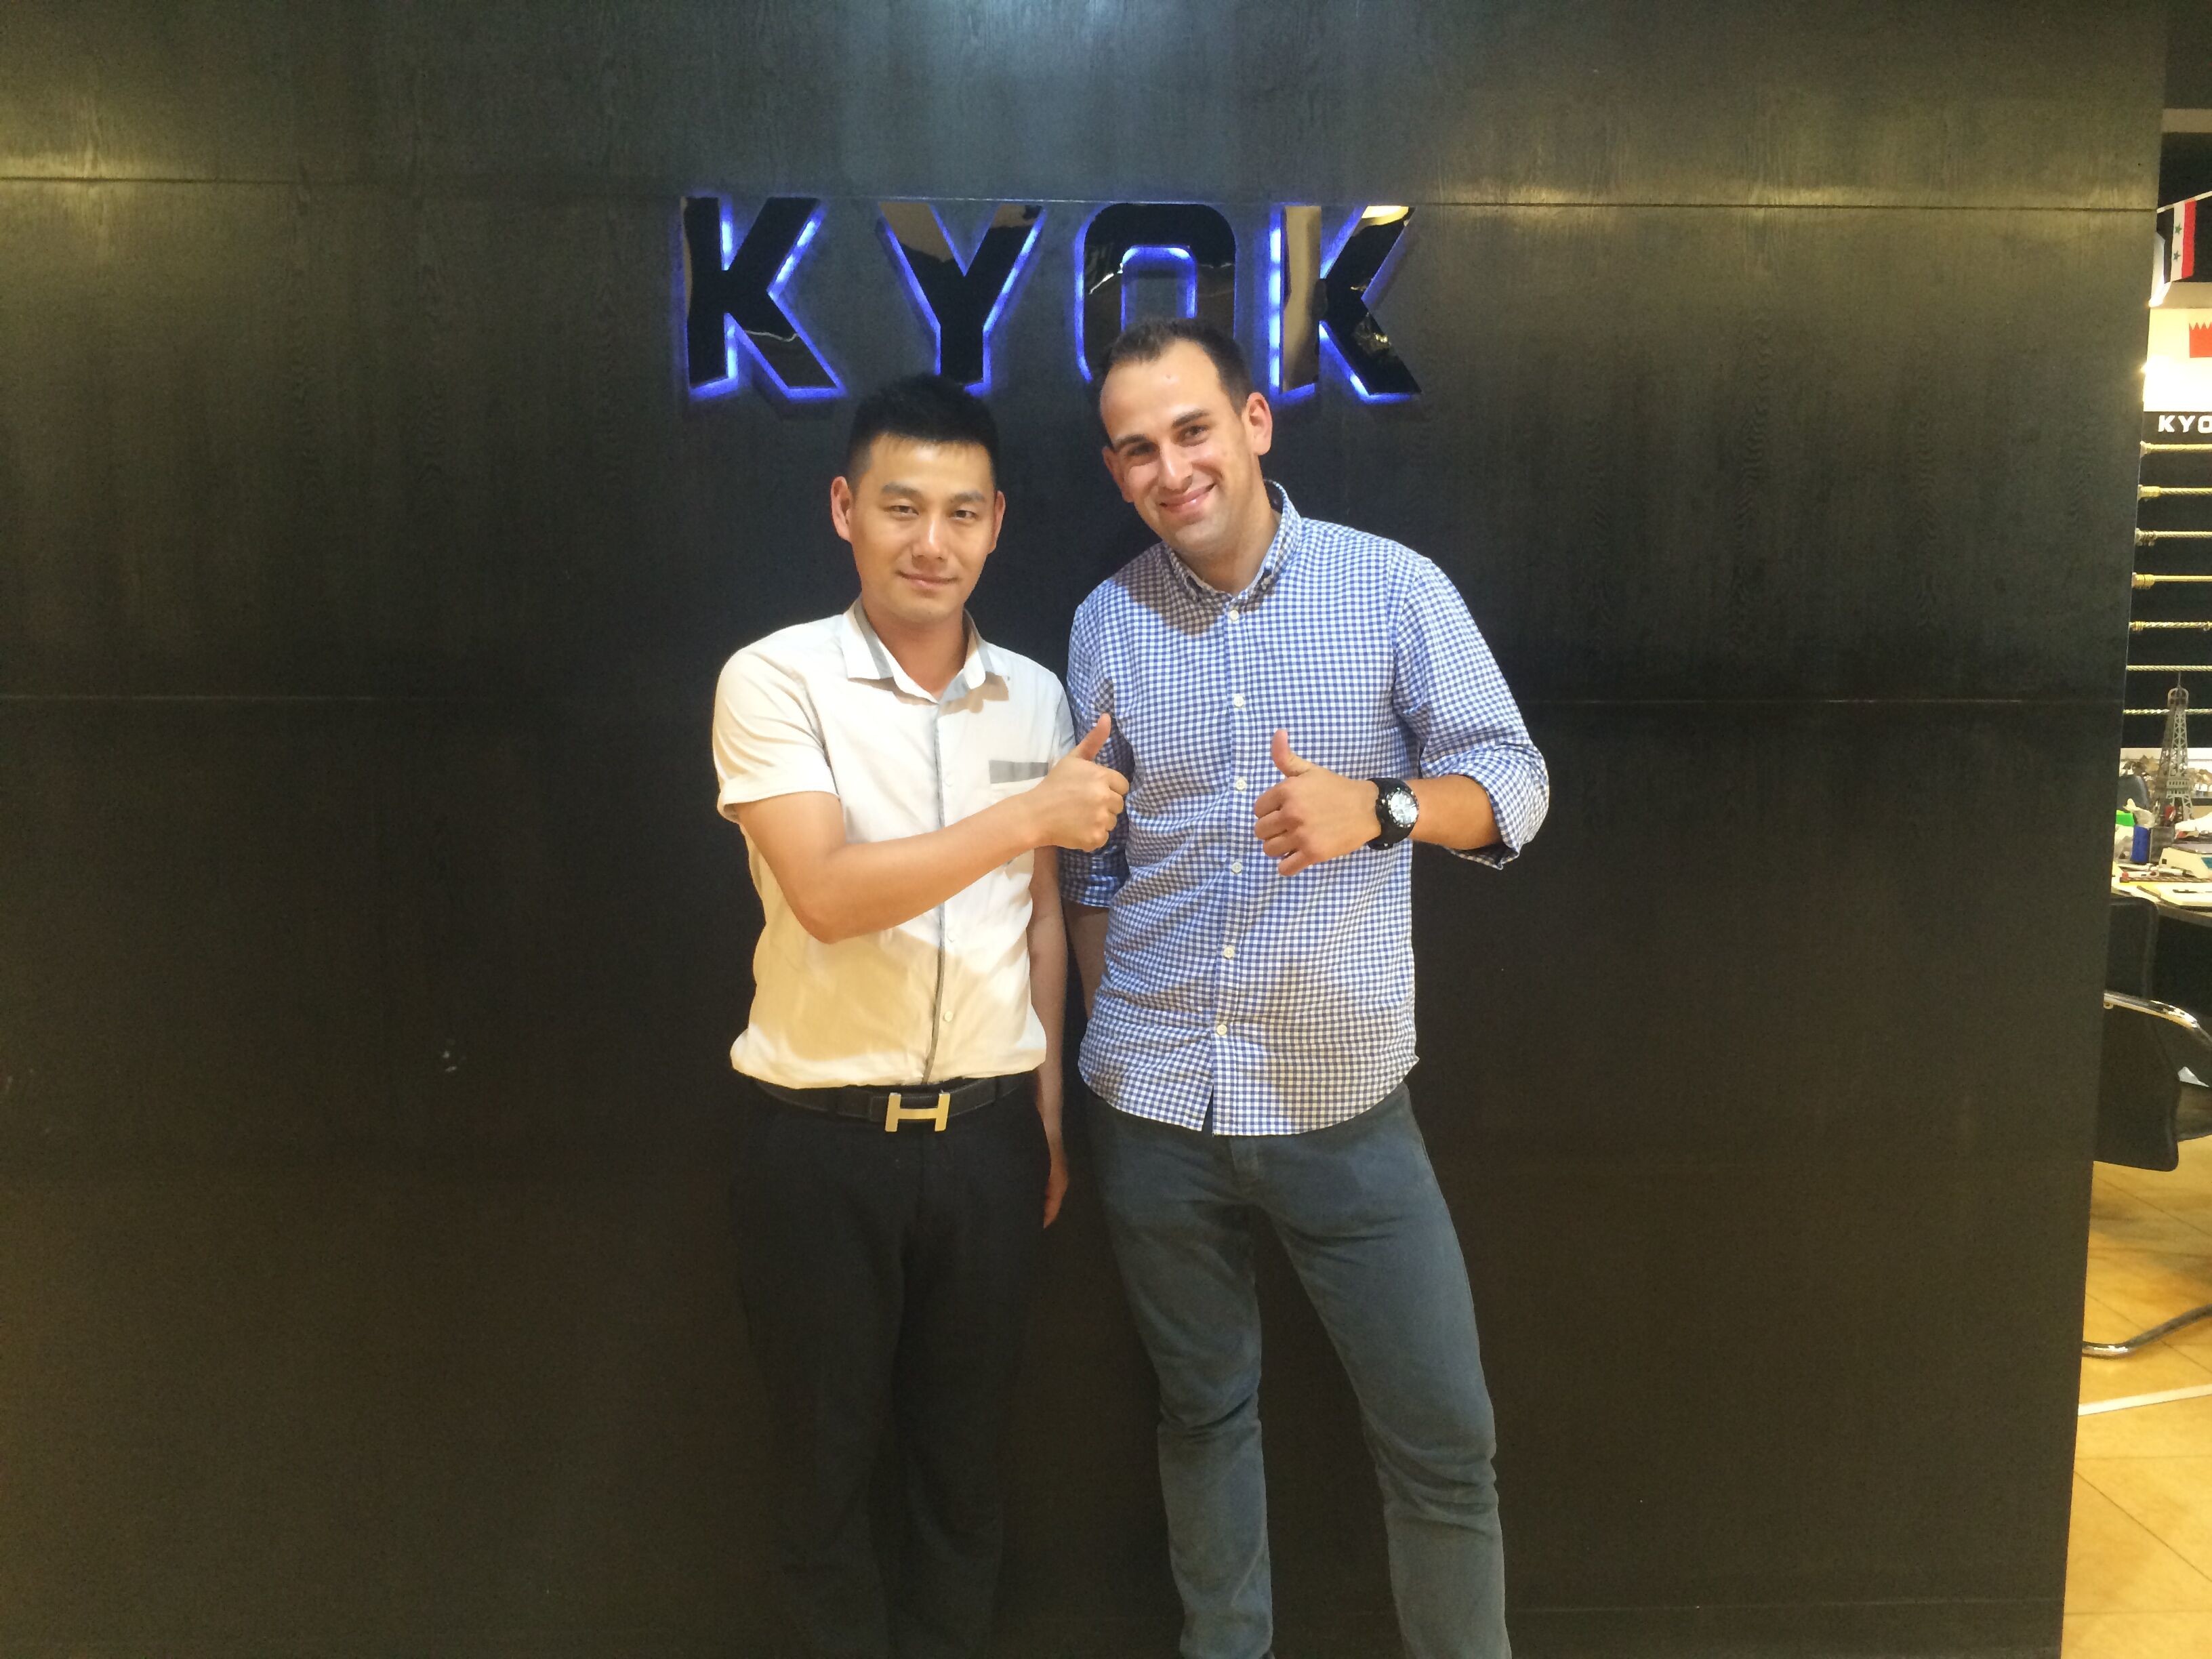 Latest company case about Spanish customer visited KYOK